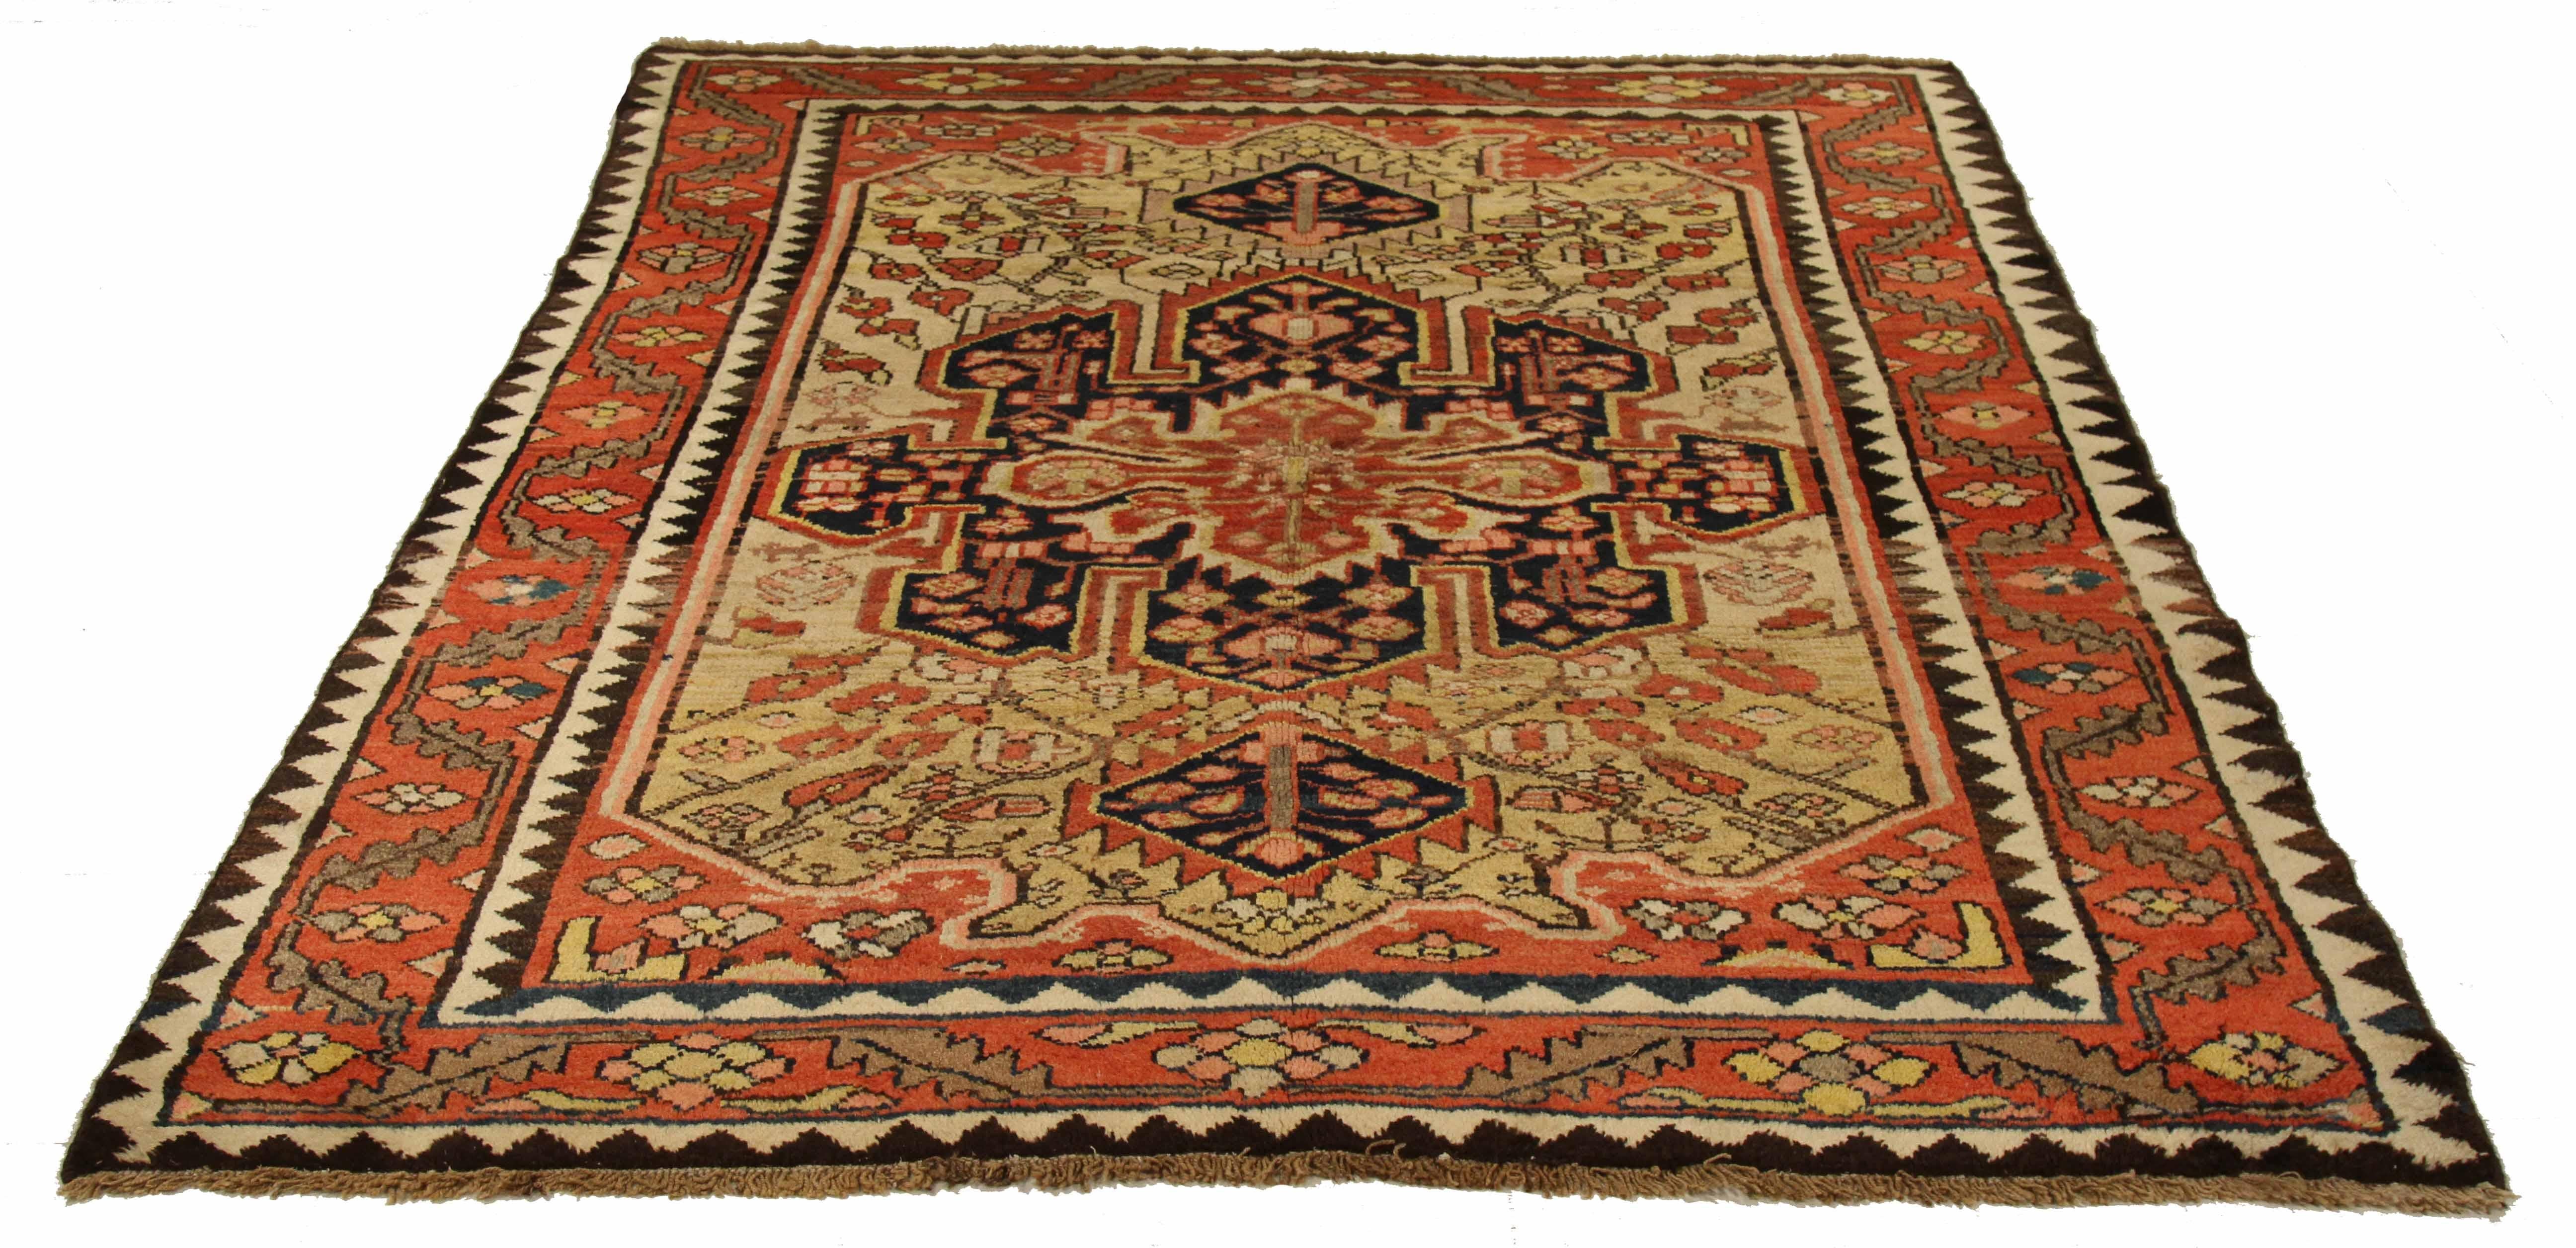 Antique Persian Hamedan area rug handcrafted from premium sheep’s wool. It's expertly dyed with all-natural vegetable dyes that are safe for humans and pets. This exquisite traditional Hamedan design is handwoven by skilled artisans, making it a